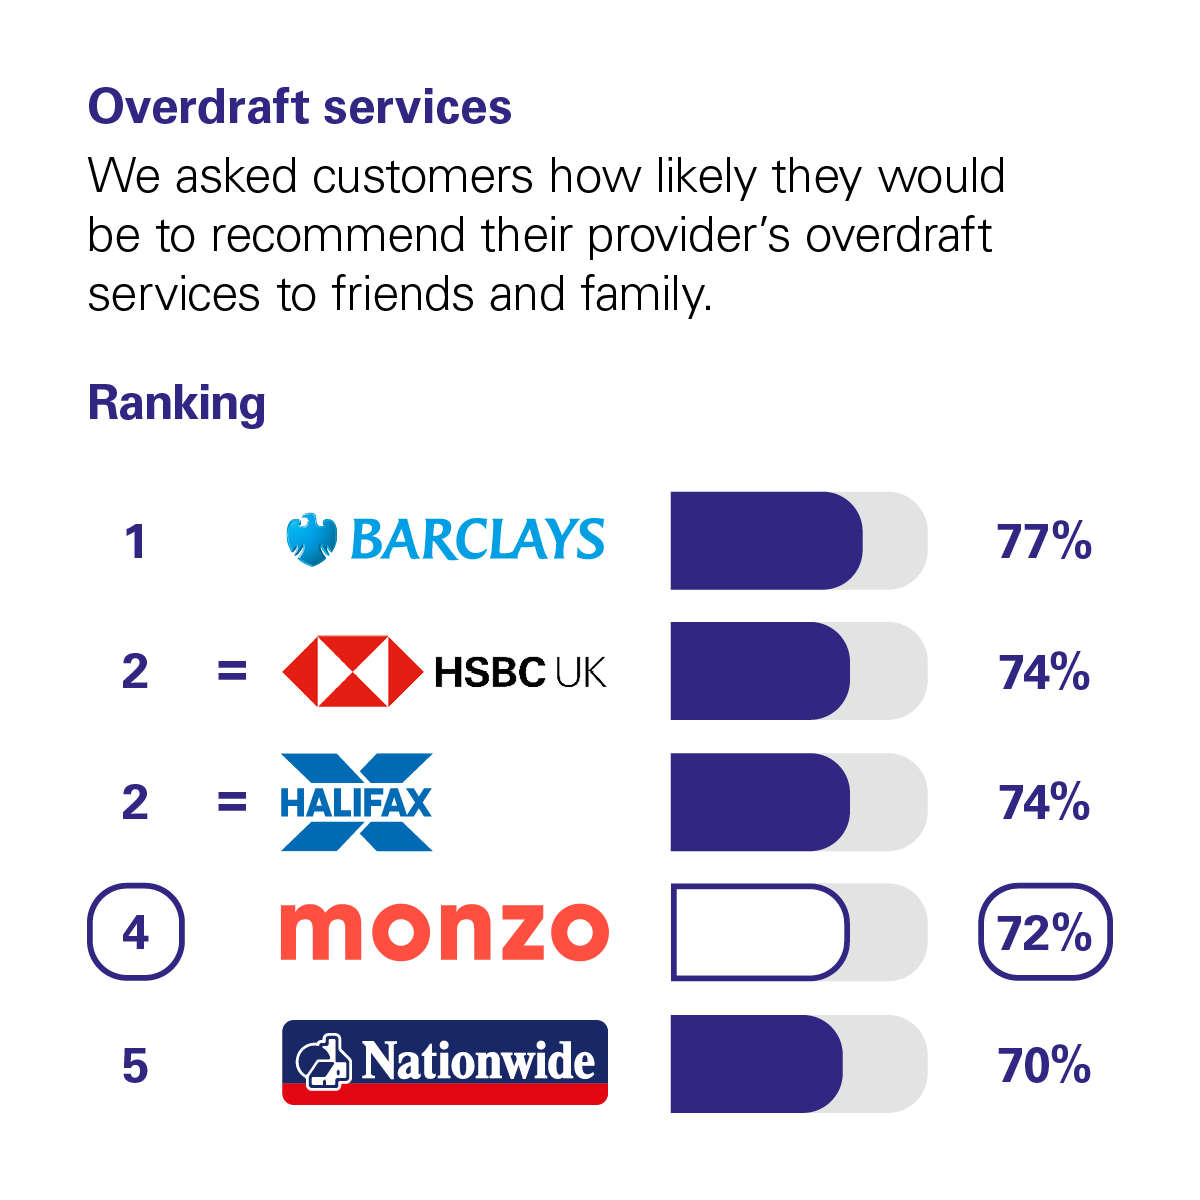 Graph showing the results of the CMA scoring of UK banks in the Overdraft Services category. The CMA asked customers how likely they would be to recommend their provider's overdraft services to friends and family. The rankings with percentage scores are: 1st Barclays with 77%. Joint 2nd are HSBC and Halifax with 74th. 4th Monzo with 72%. 5th Nationwide with 70%.